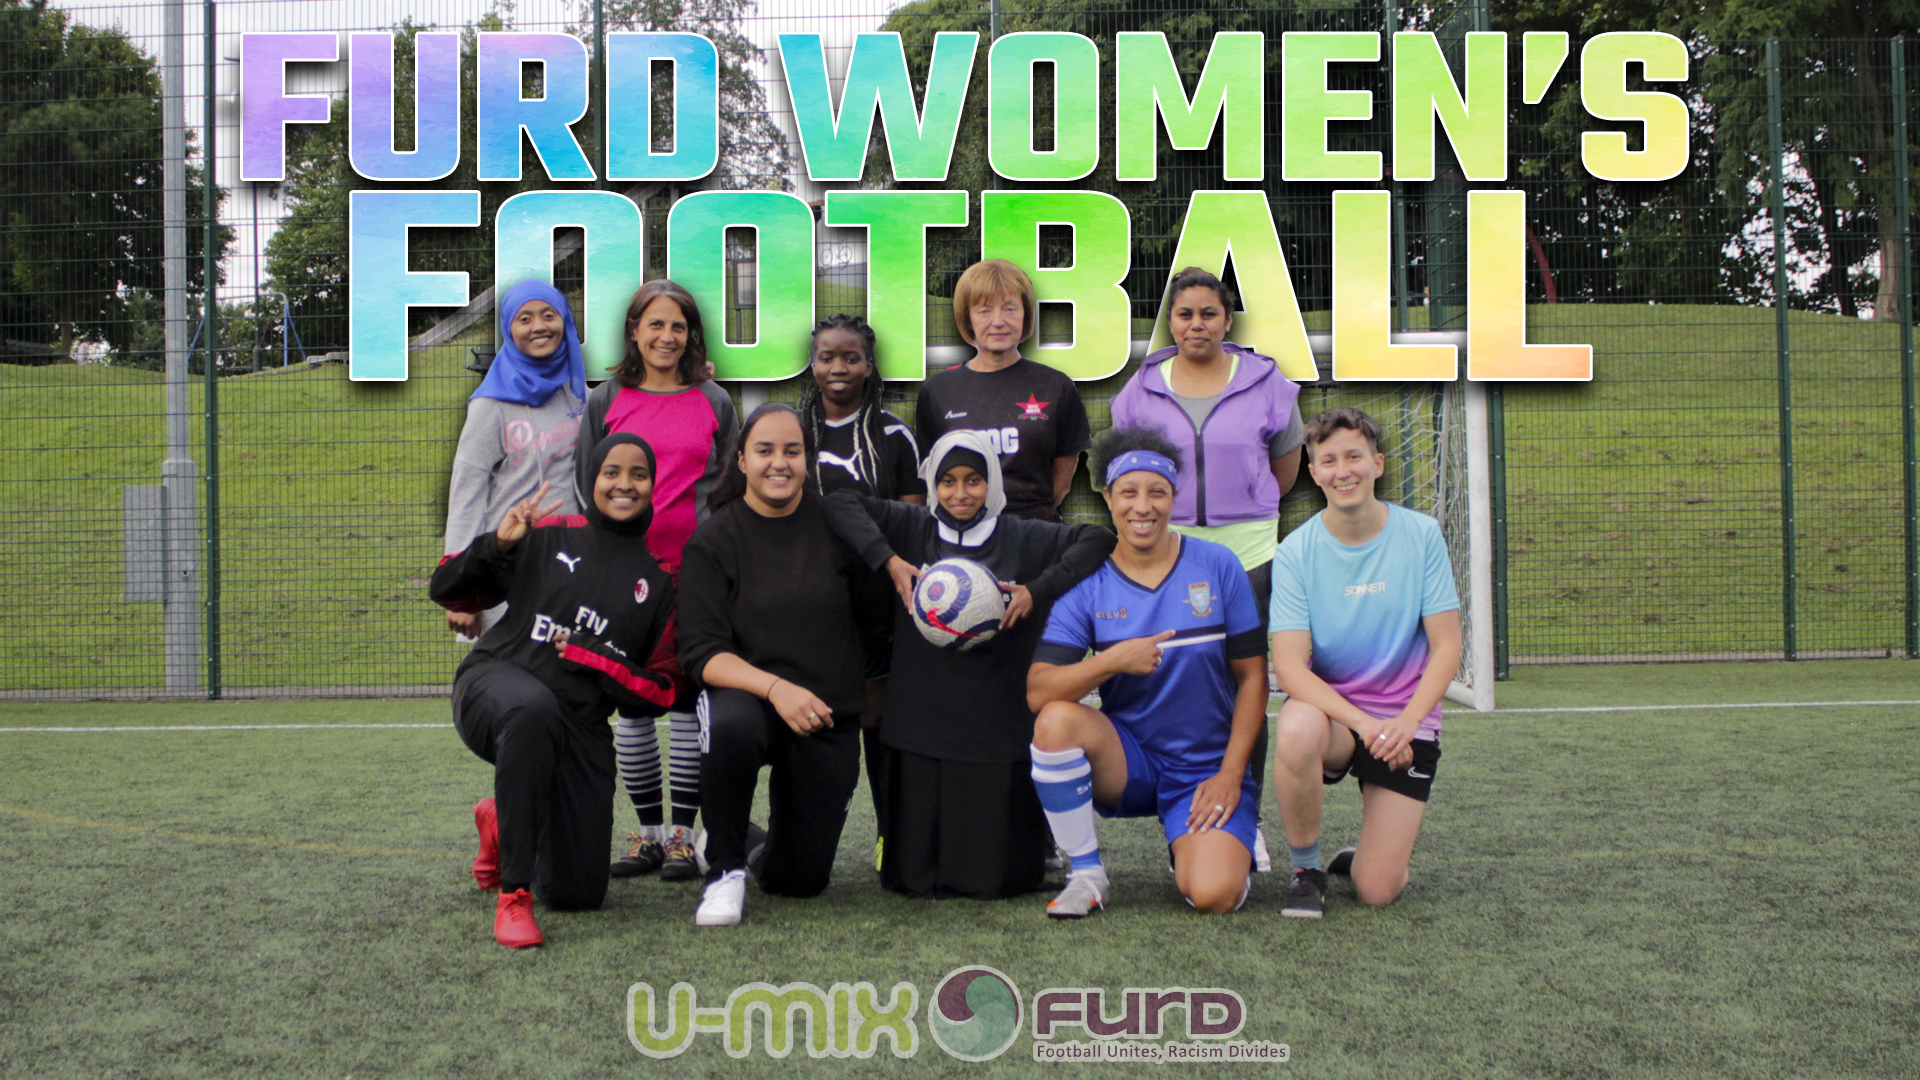 13 Players and a Poet team photo - FURD women's football group, summer 2021.